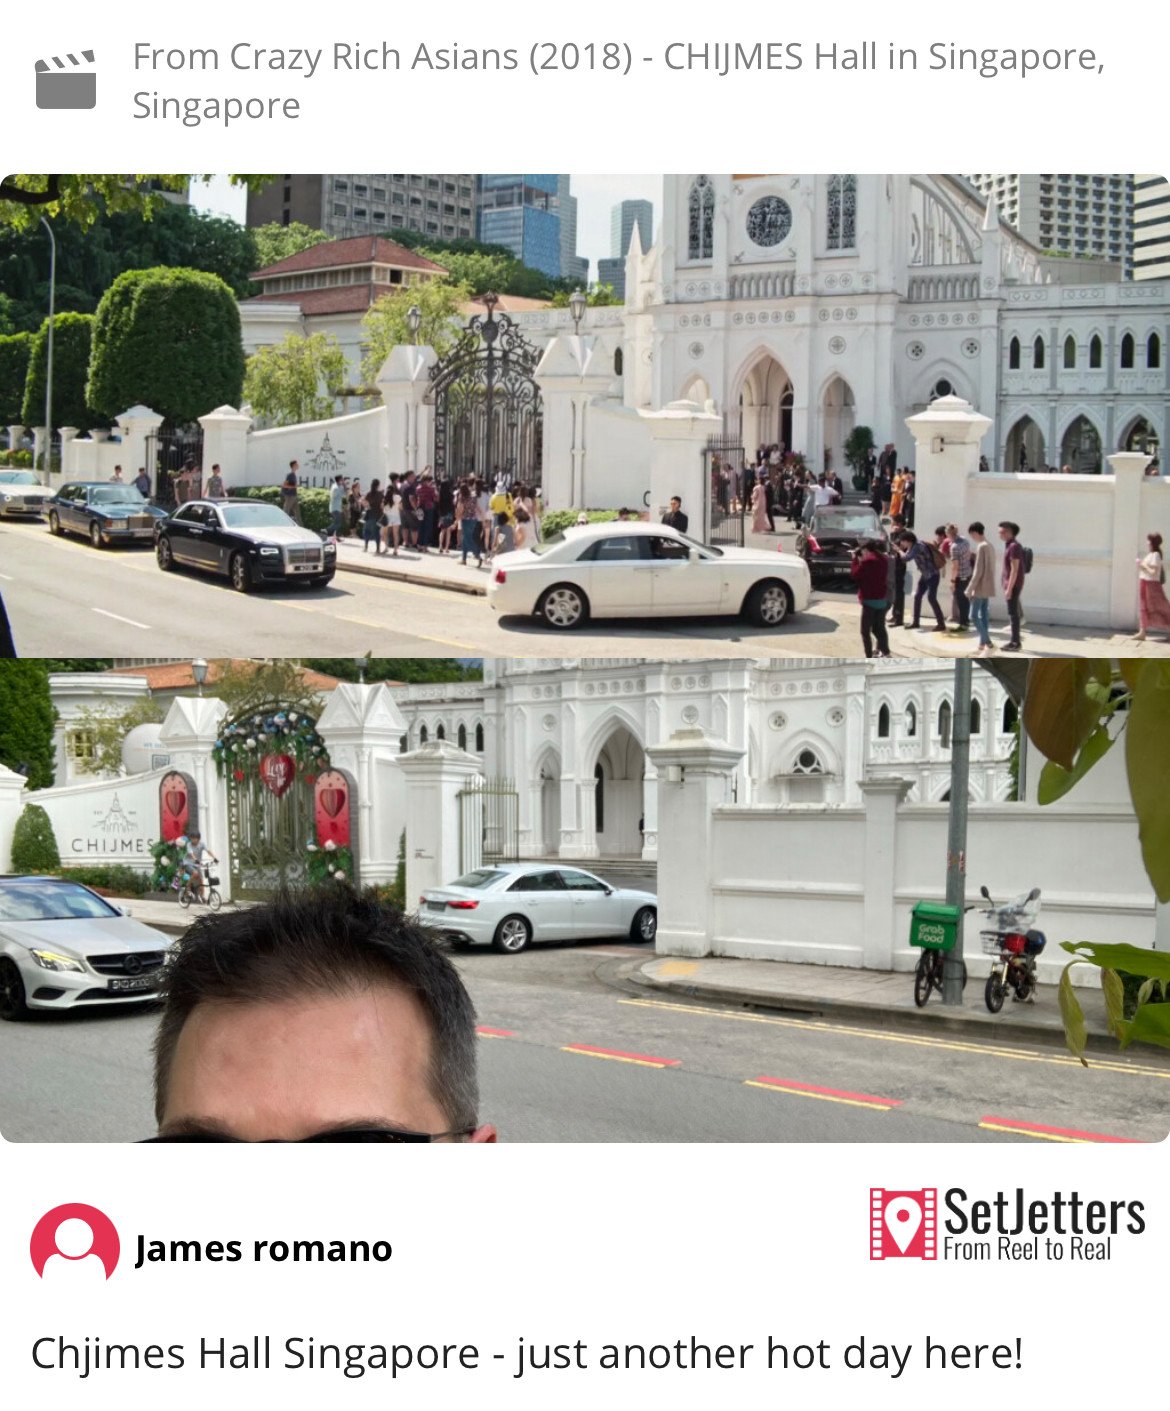 The wedding in Crazy Rich Asians was filmed at Chijmes Hall in Singapore. Fans using the SetJetters app can place themselves at the scene. Photo: Warner Bros/SetJetters